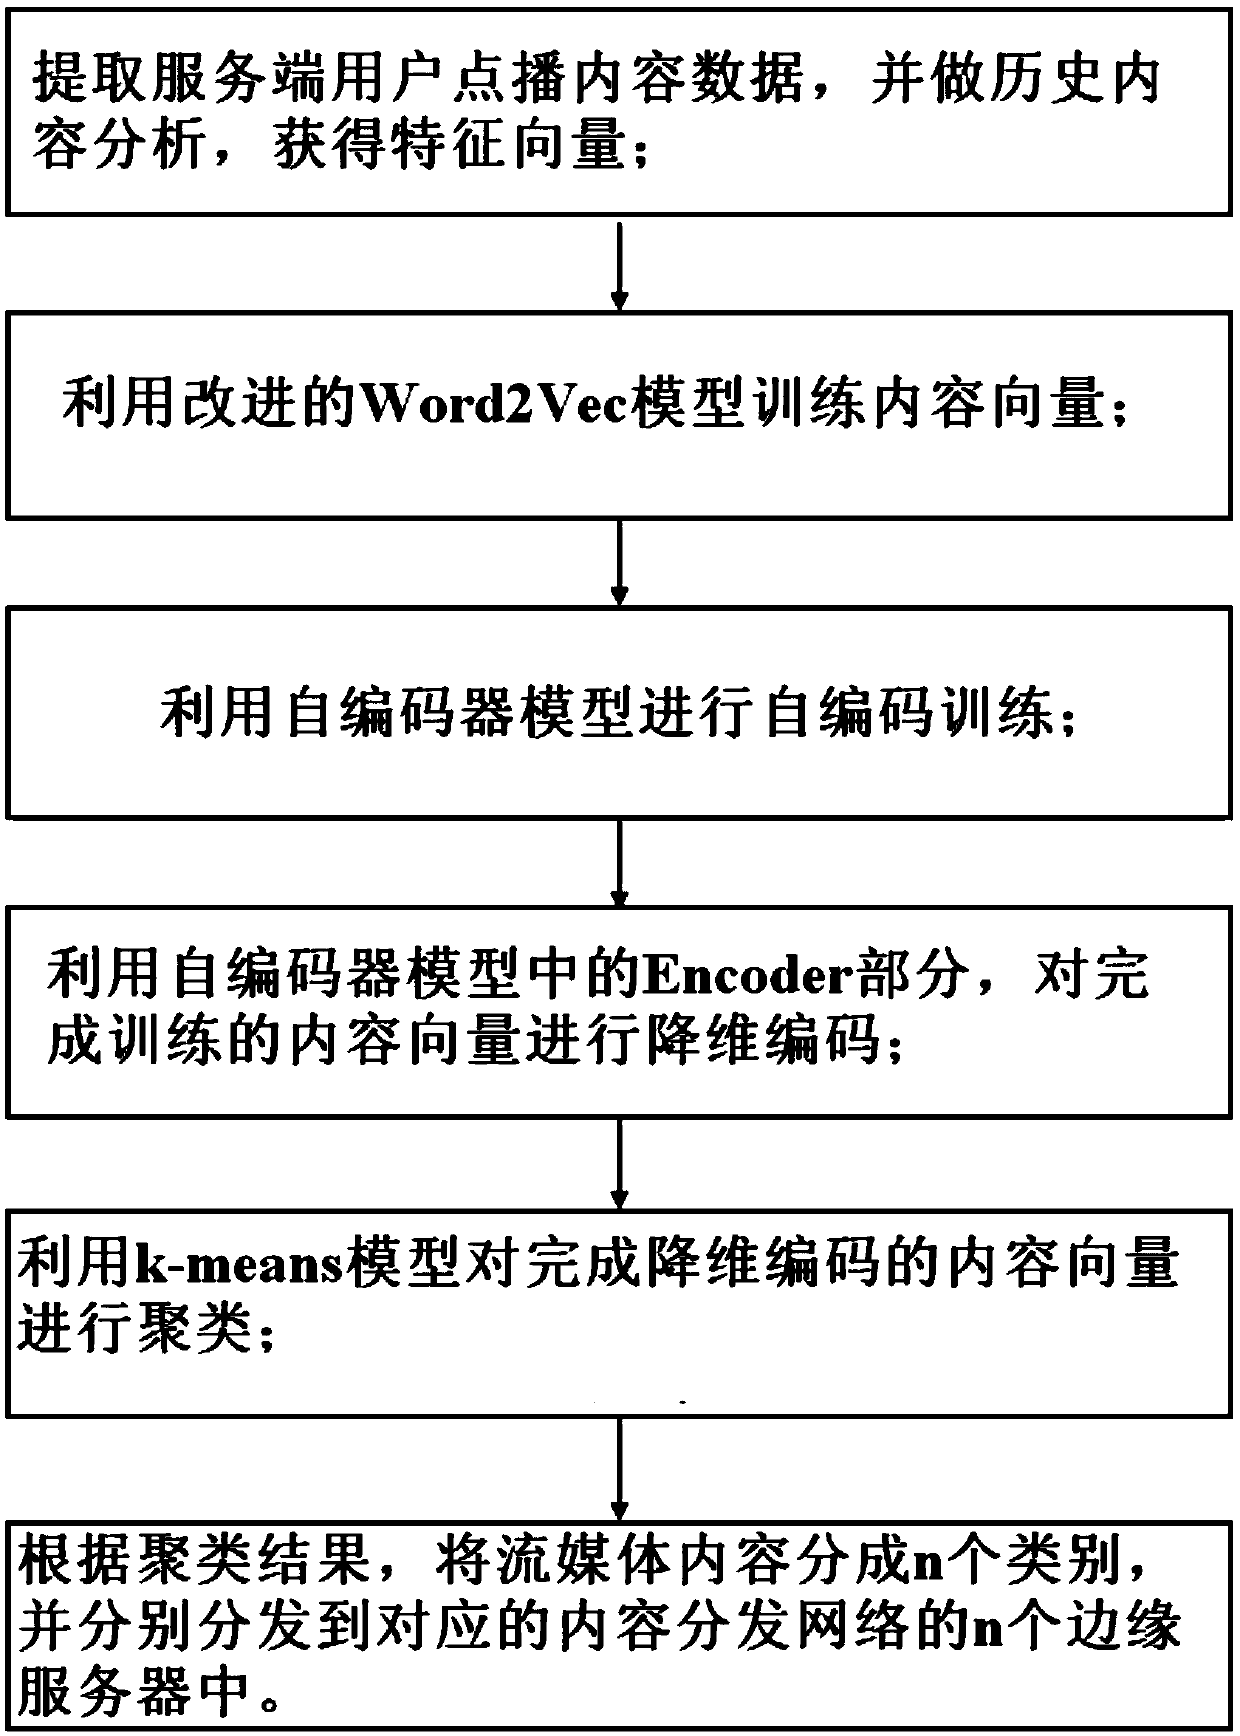 Streaming media content distribution method based on data feature dimension reduction coding